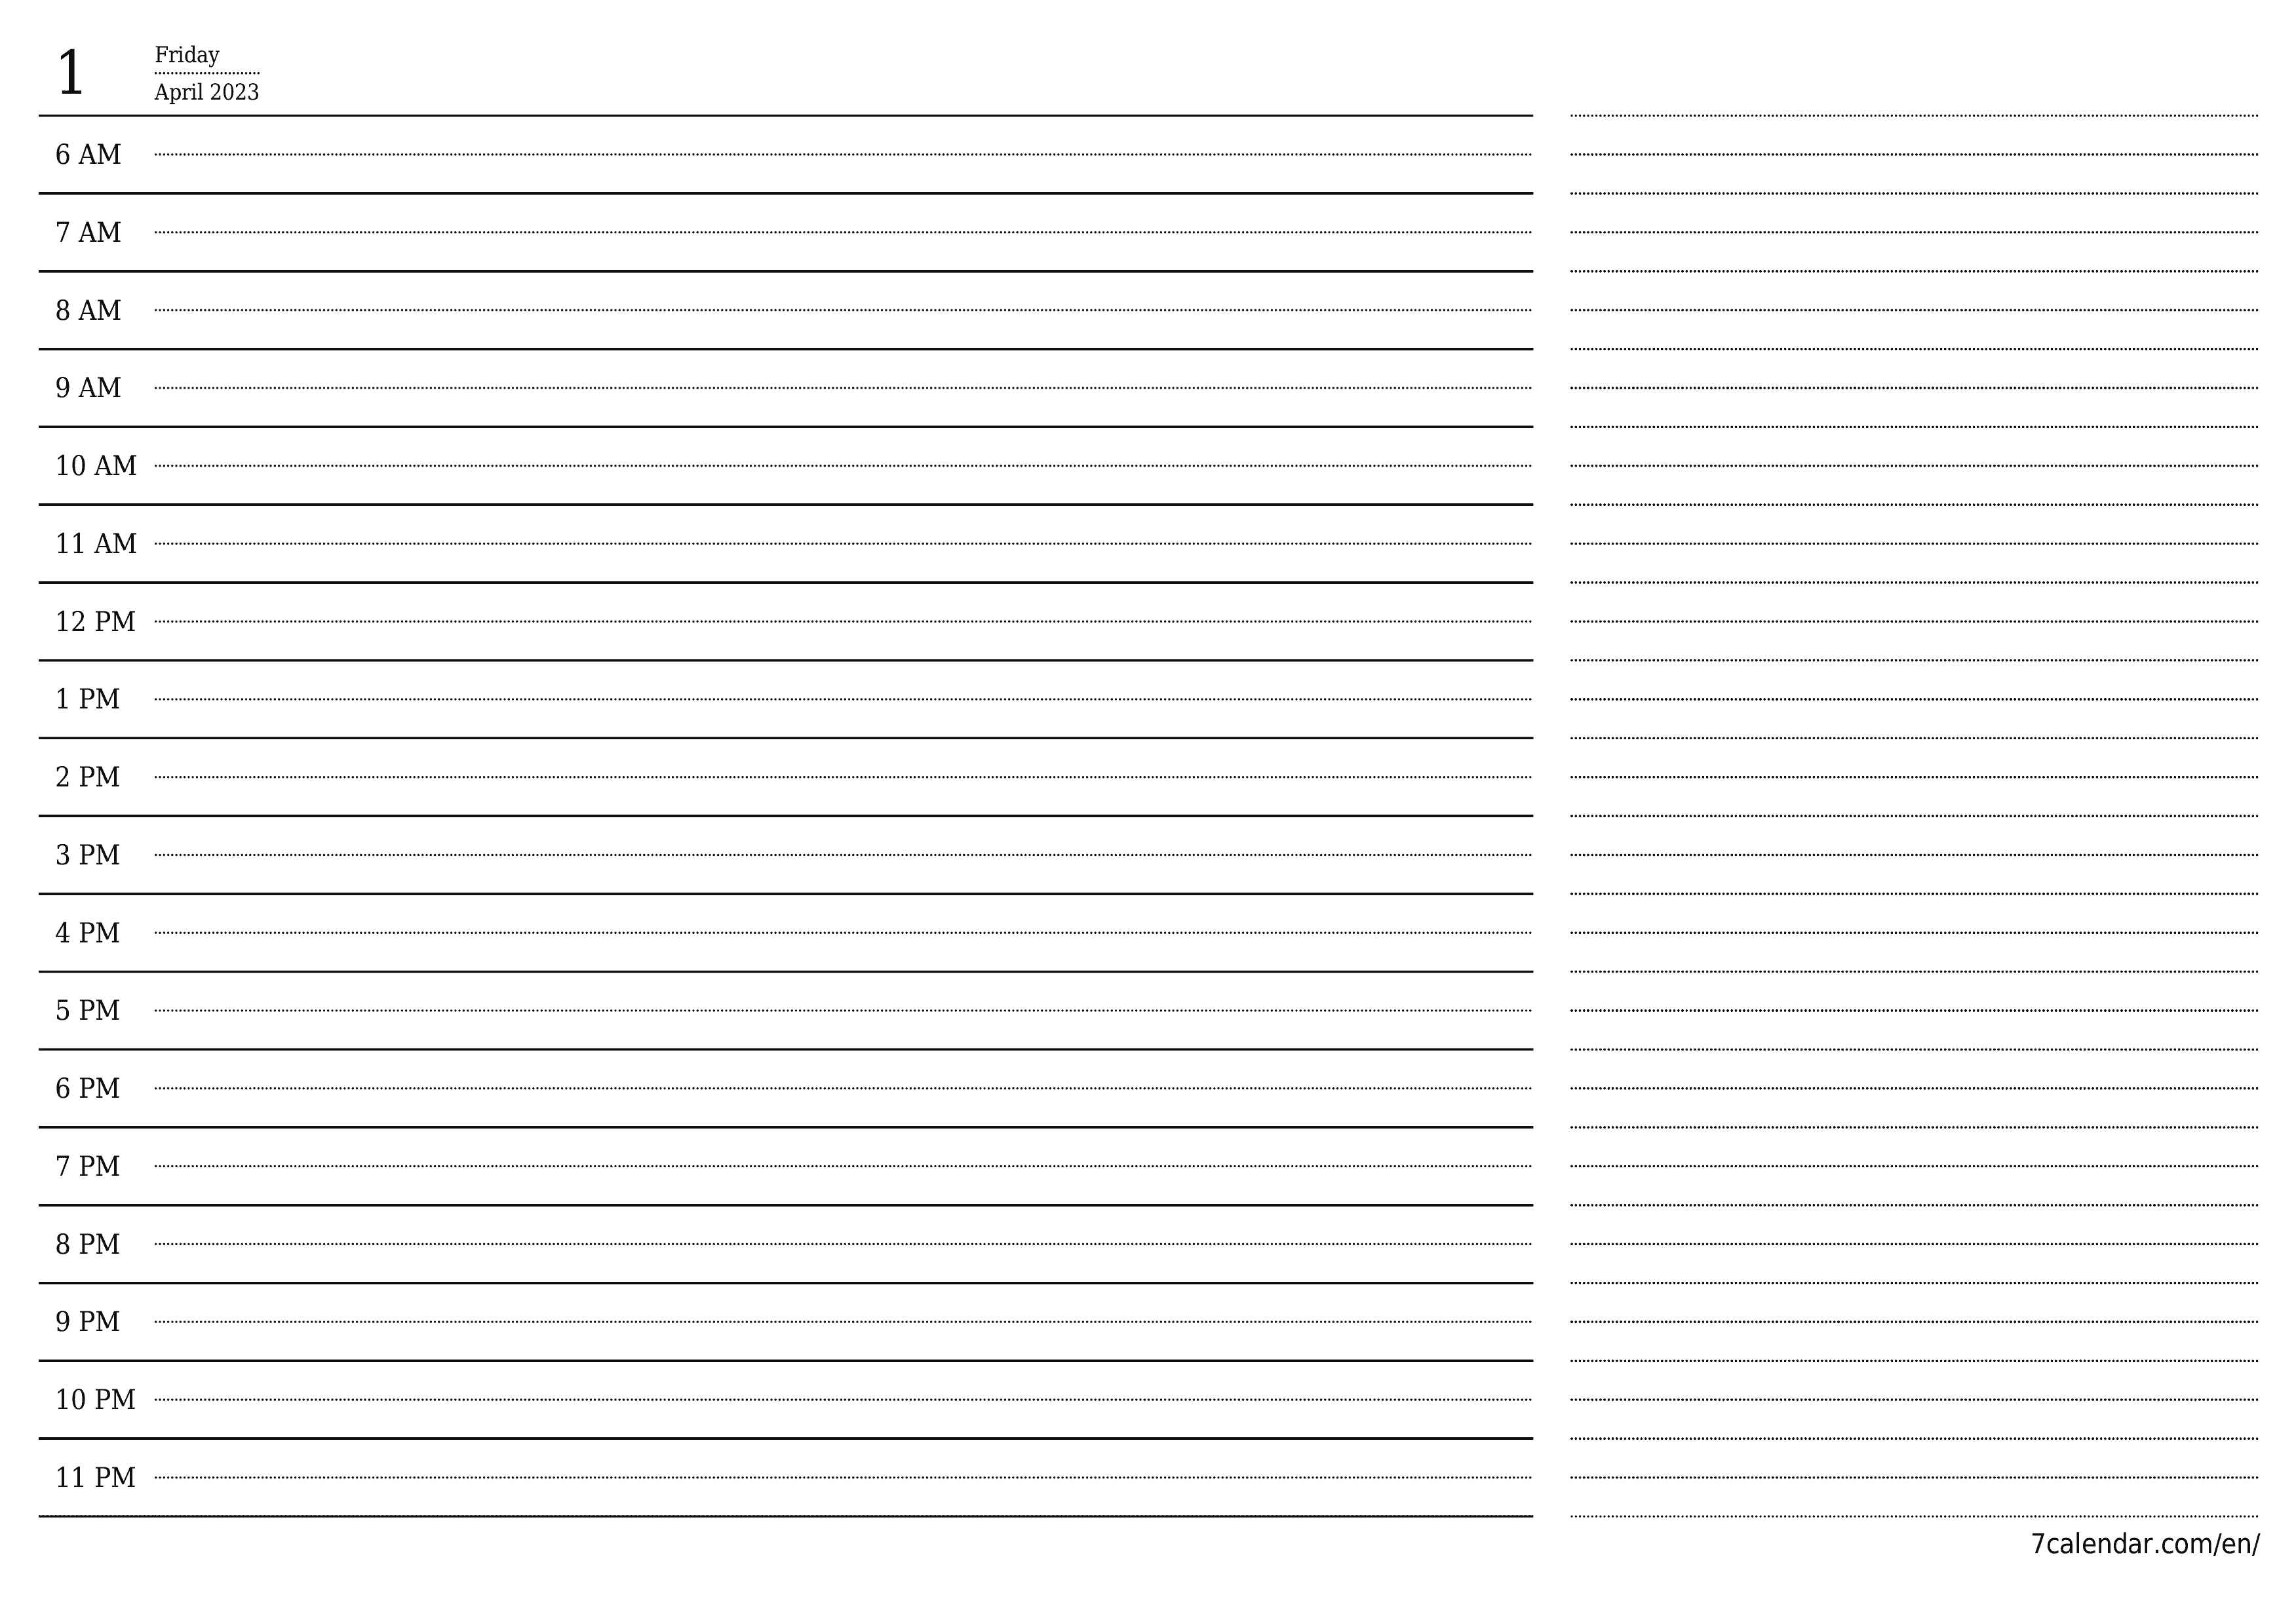 Blank daily printable calendar and planner for day April 2023 with notes, save and print to PDF PNG English - 7calendar.com